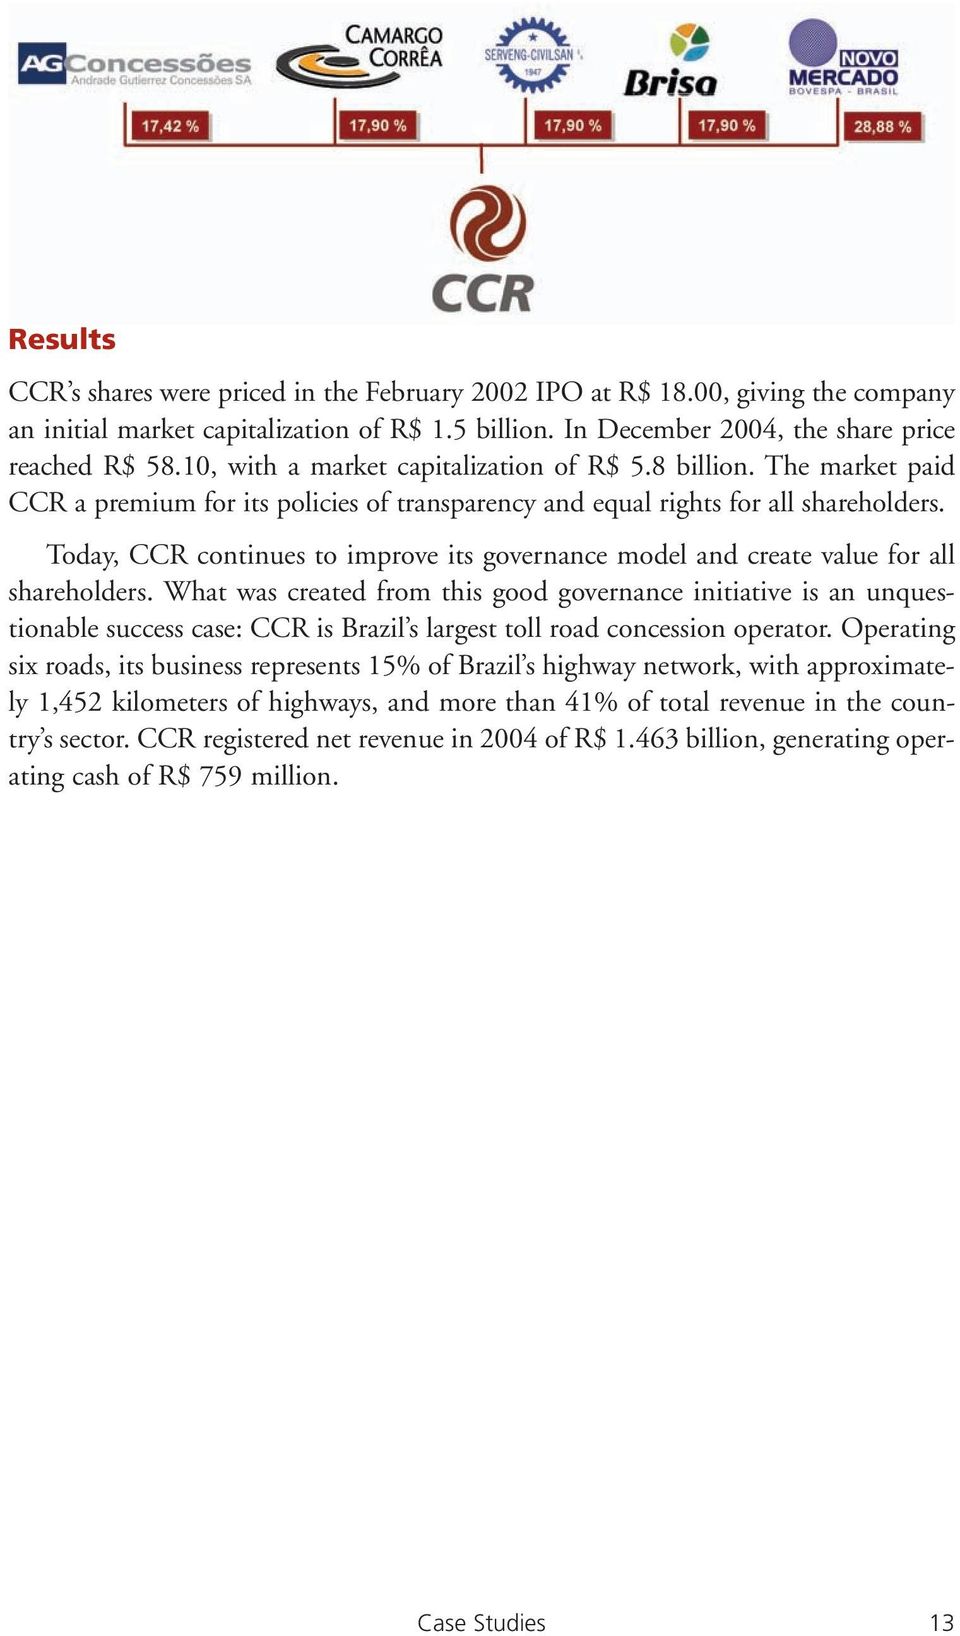 Today, CCR continues to improve its governance model and create value for all shareholders.